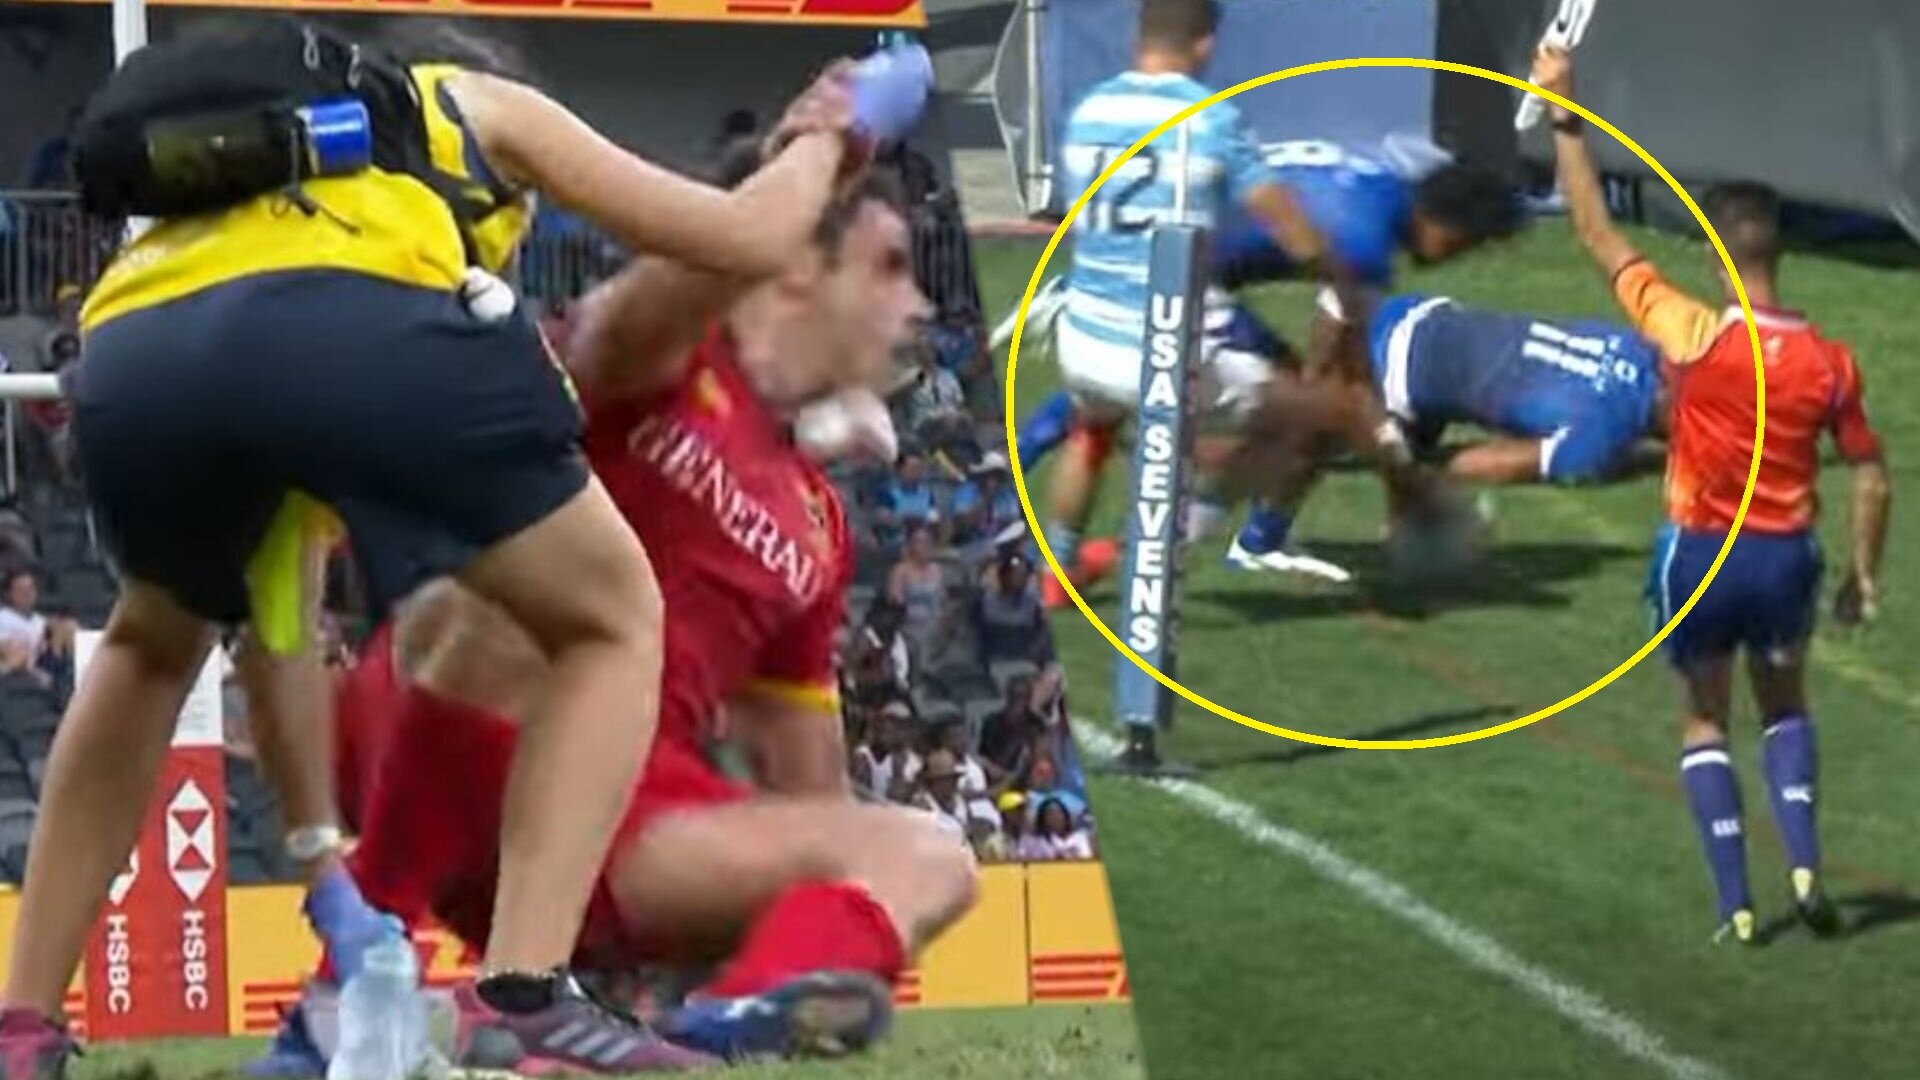 Dark moments that will make you question your view on Sevens